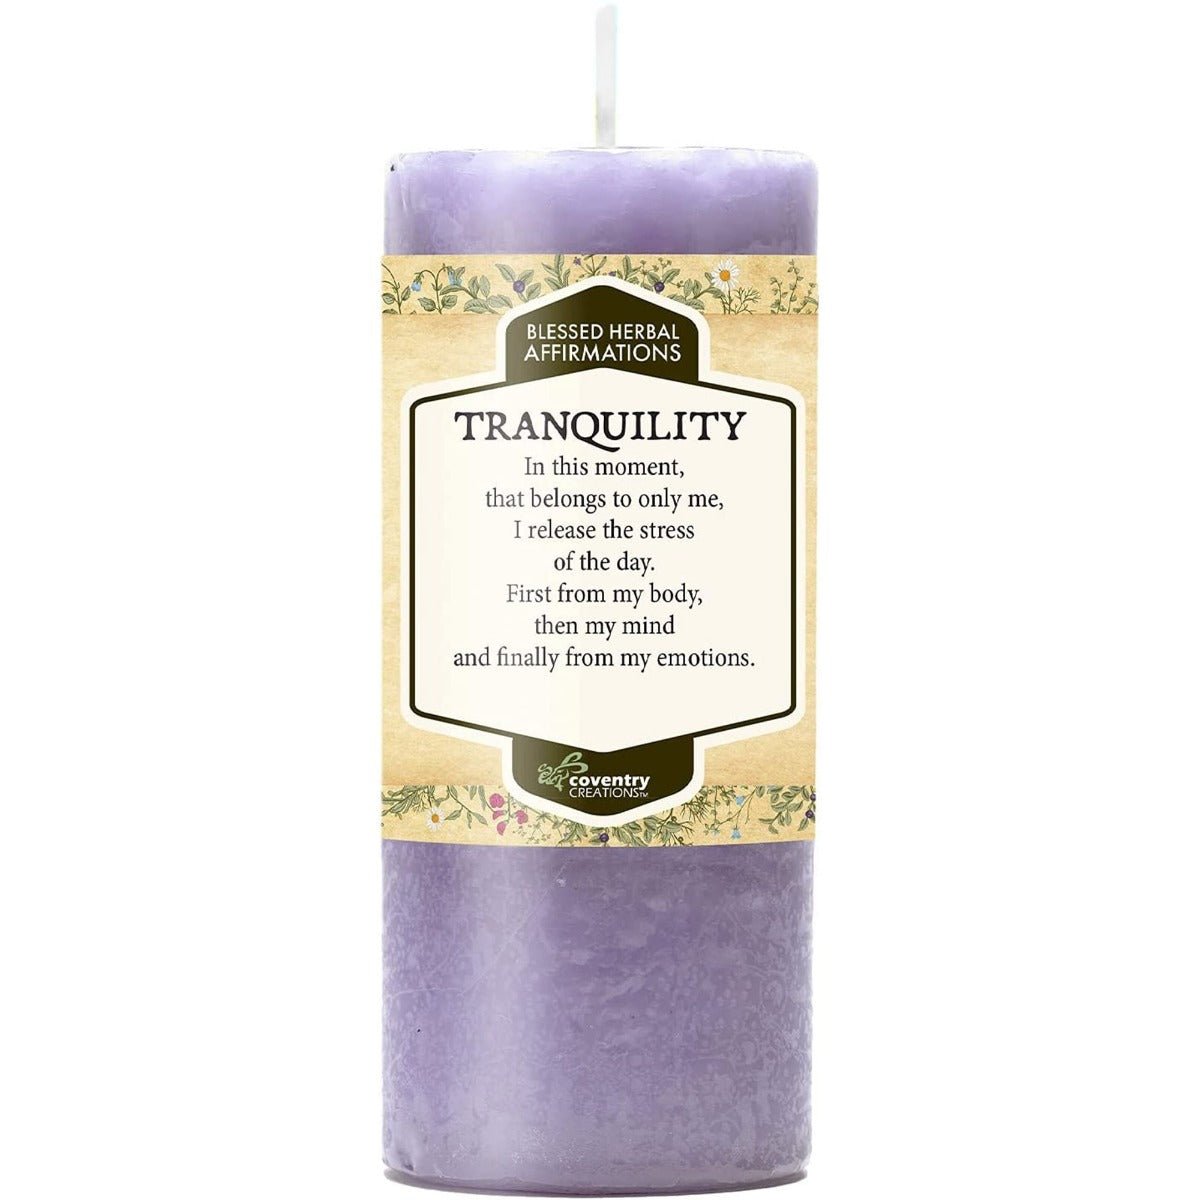 Tranquility Affirmation Candle - 13 Moons